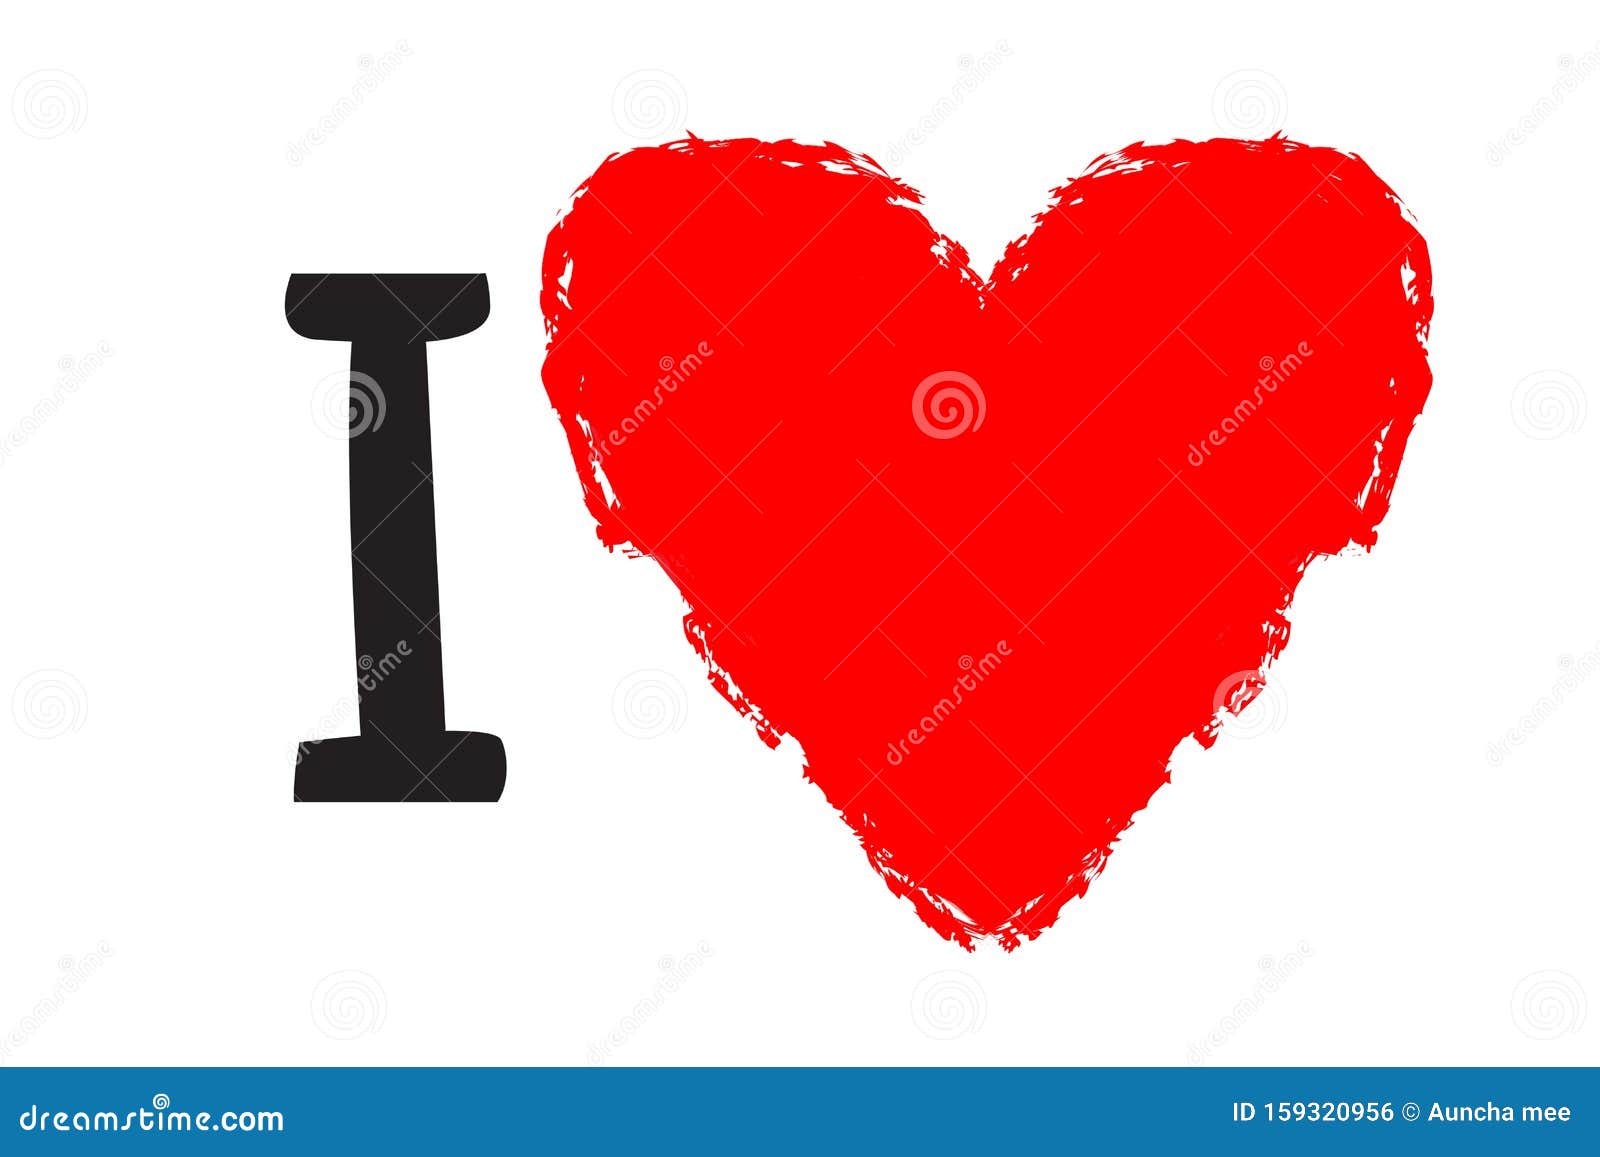 Love Letter with Red Heart on White Background. Illustration ...